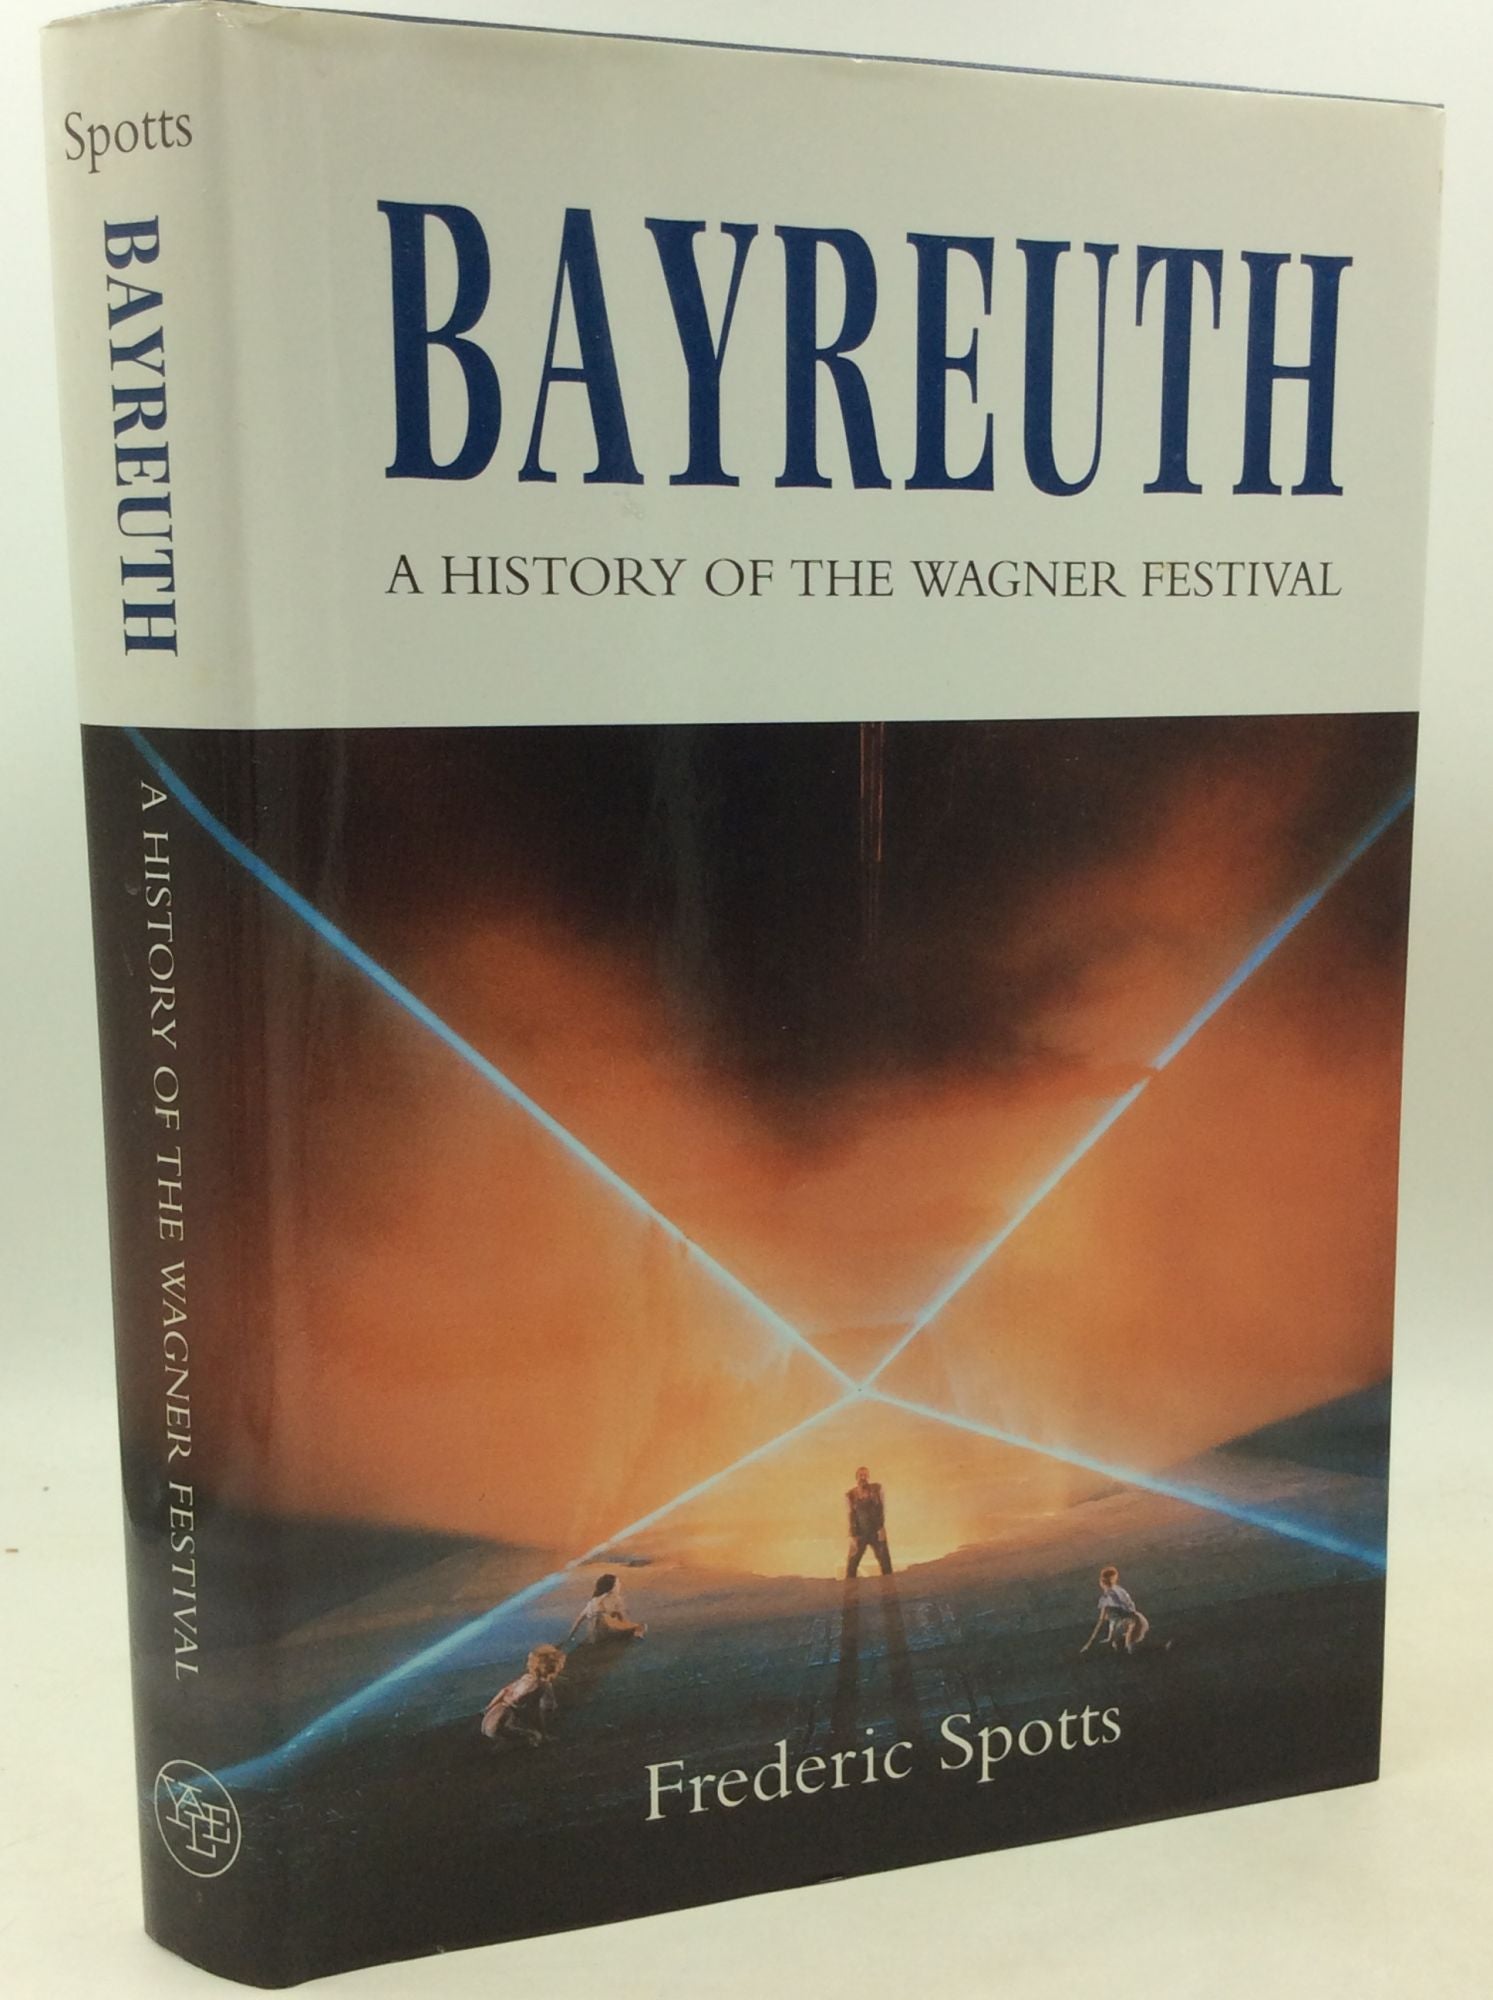 Frederic Spotts - Bayreuth: A History of the Wagner Festival